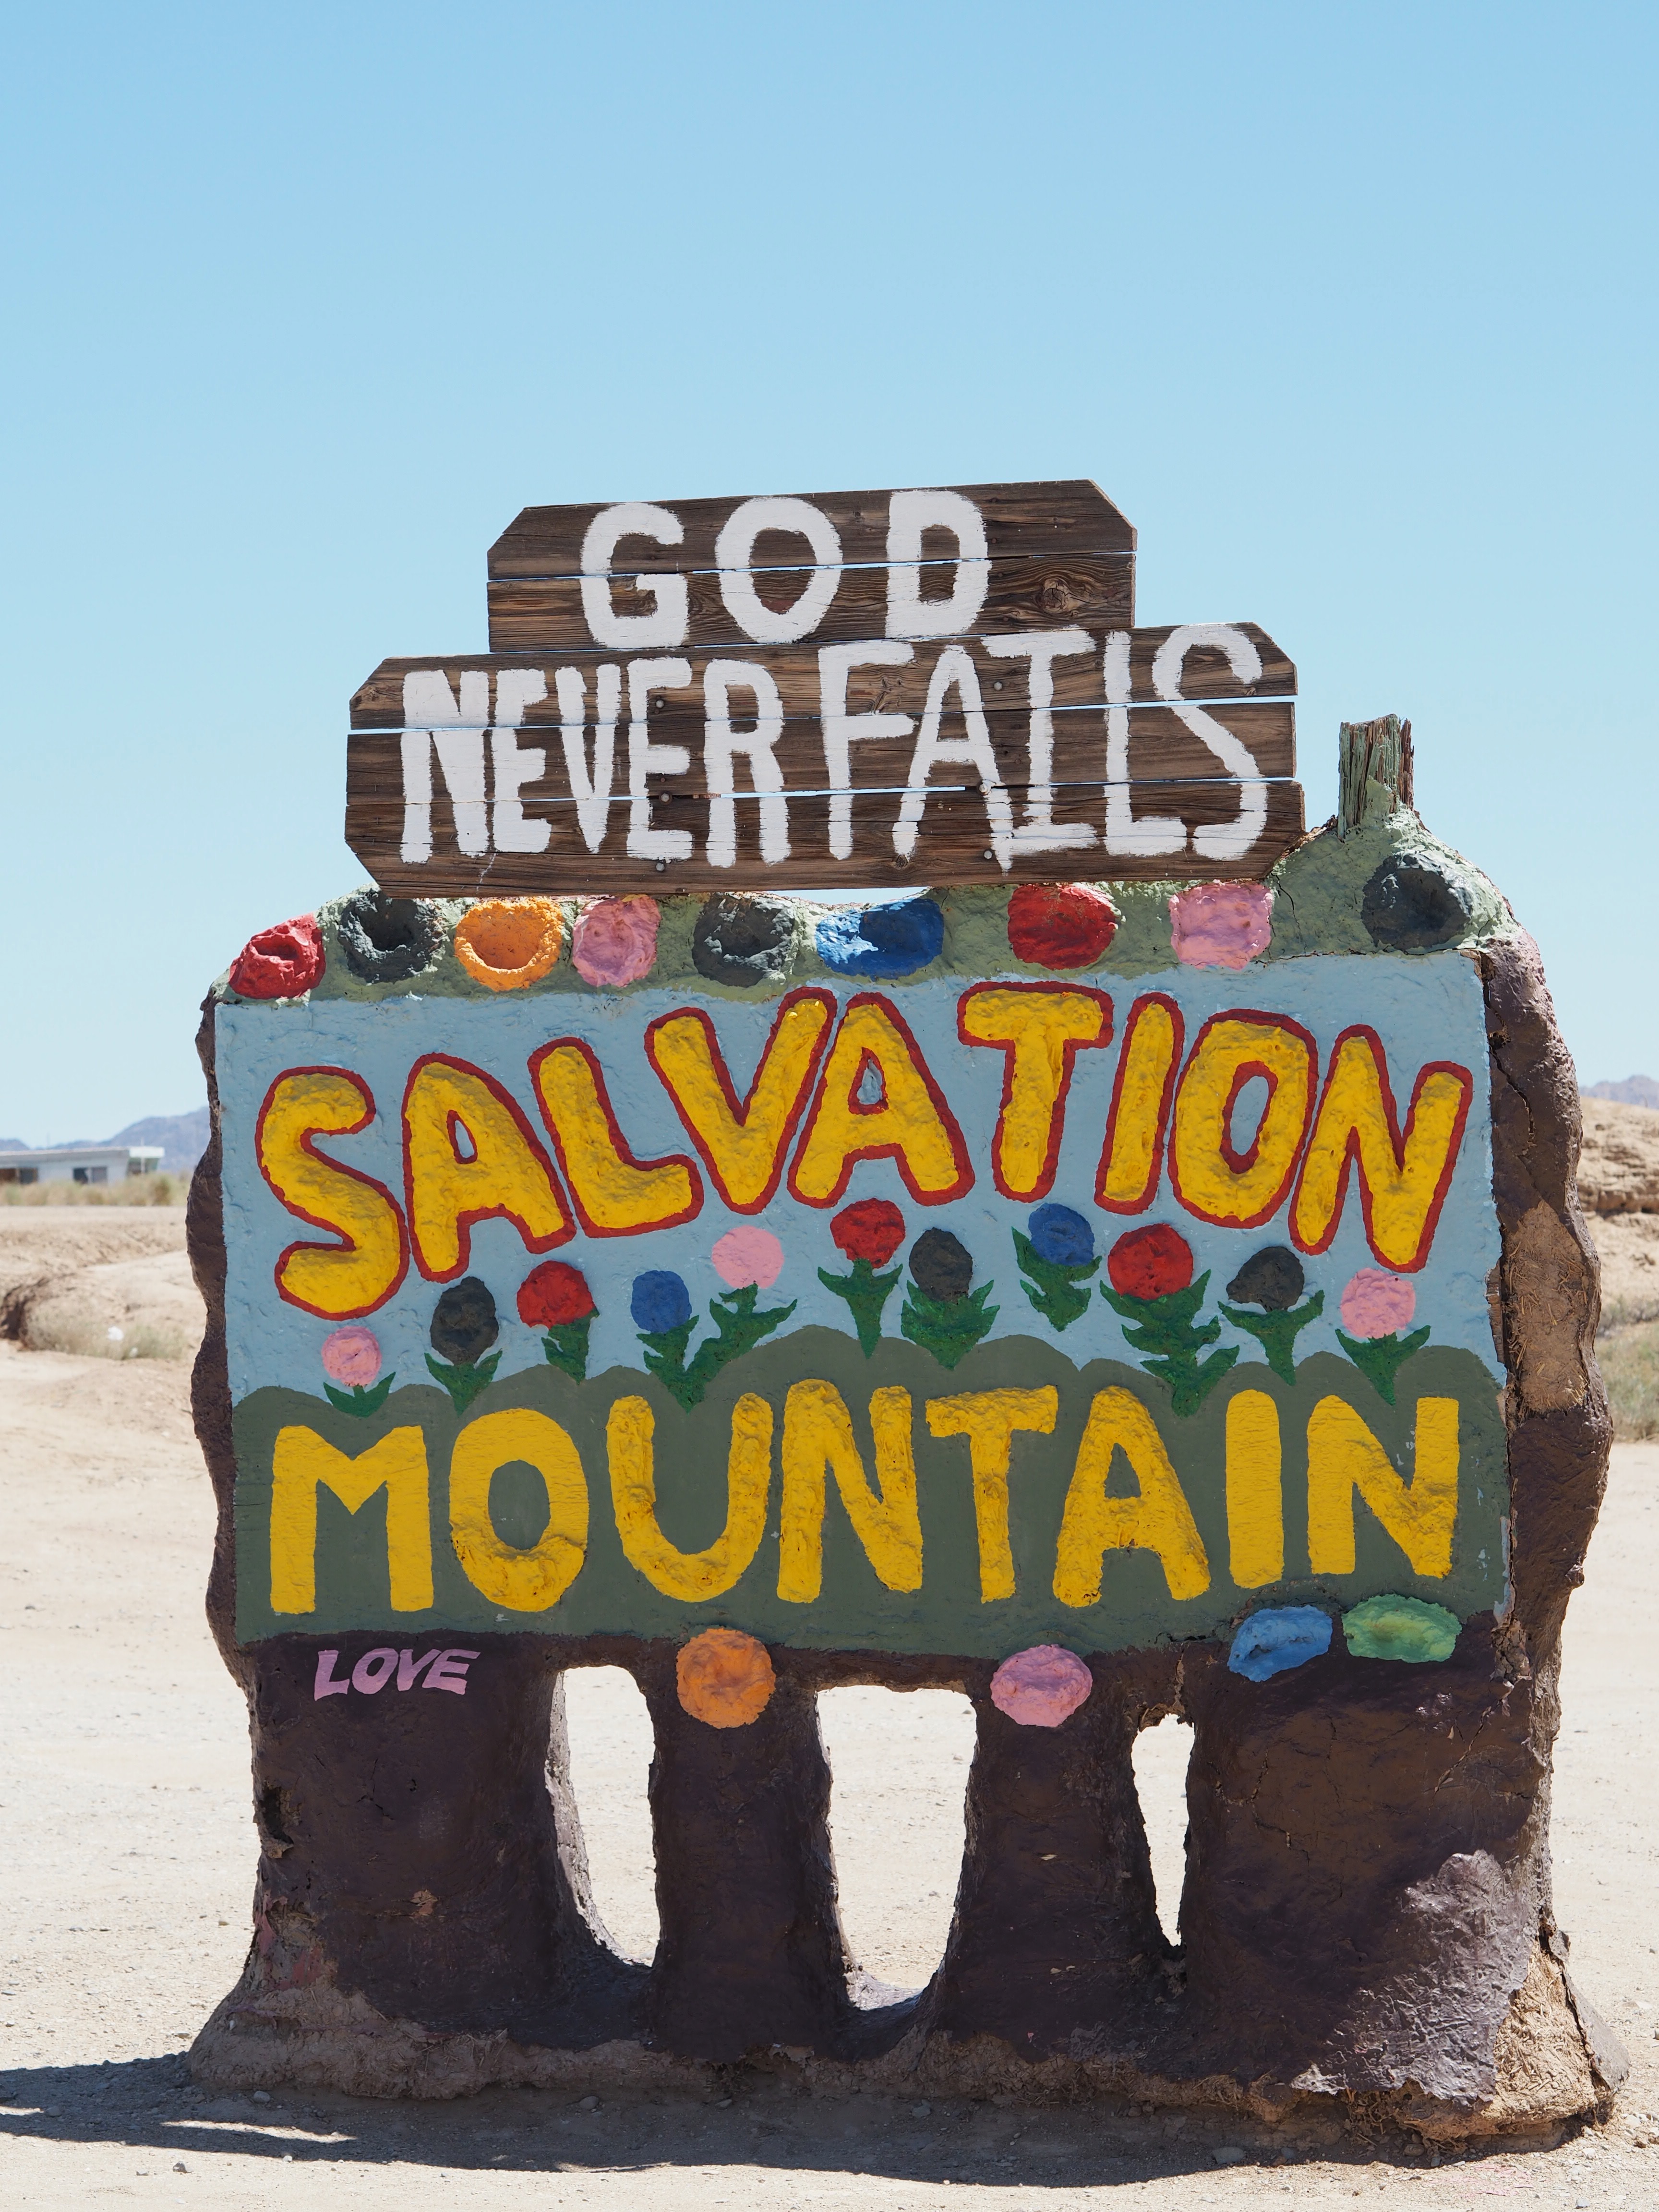 God Never Fails: Colourful Welcome Sign at Salvation Mountain